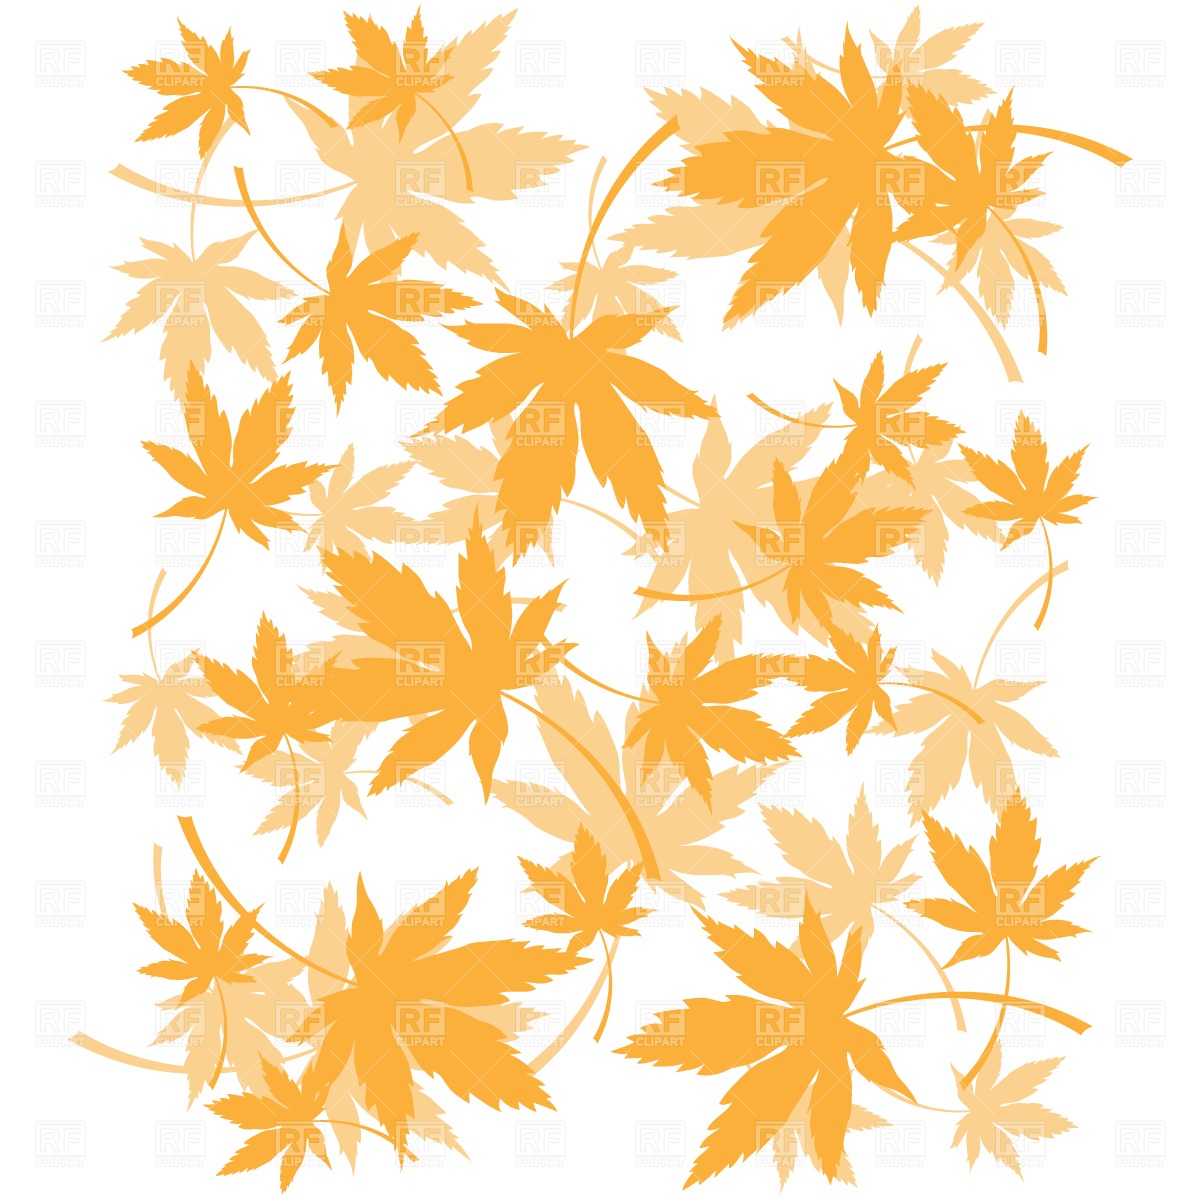 Autumn Leaves Background 377 Backgrounds Textures Abstract